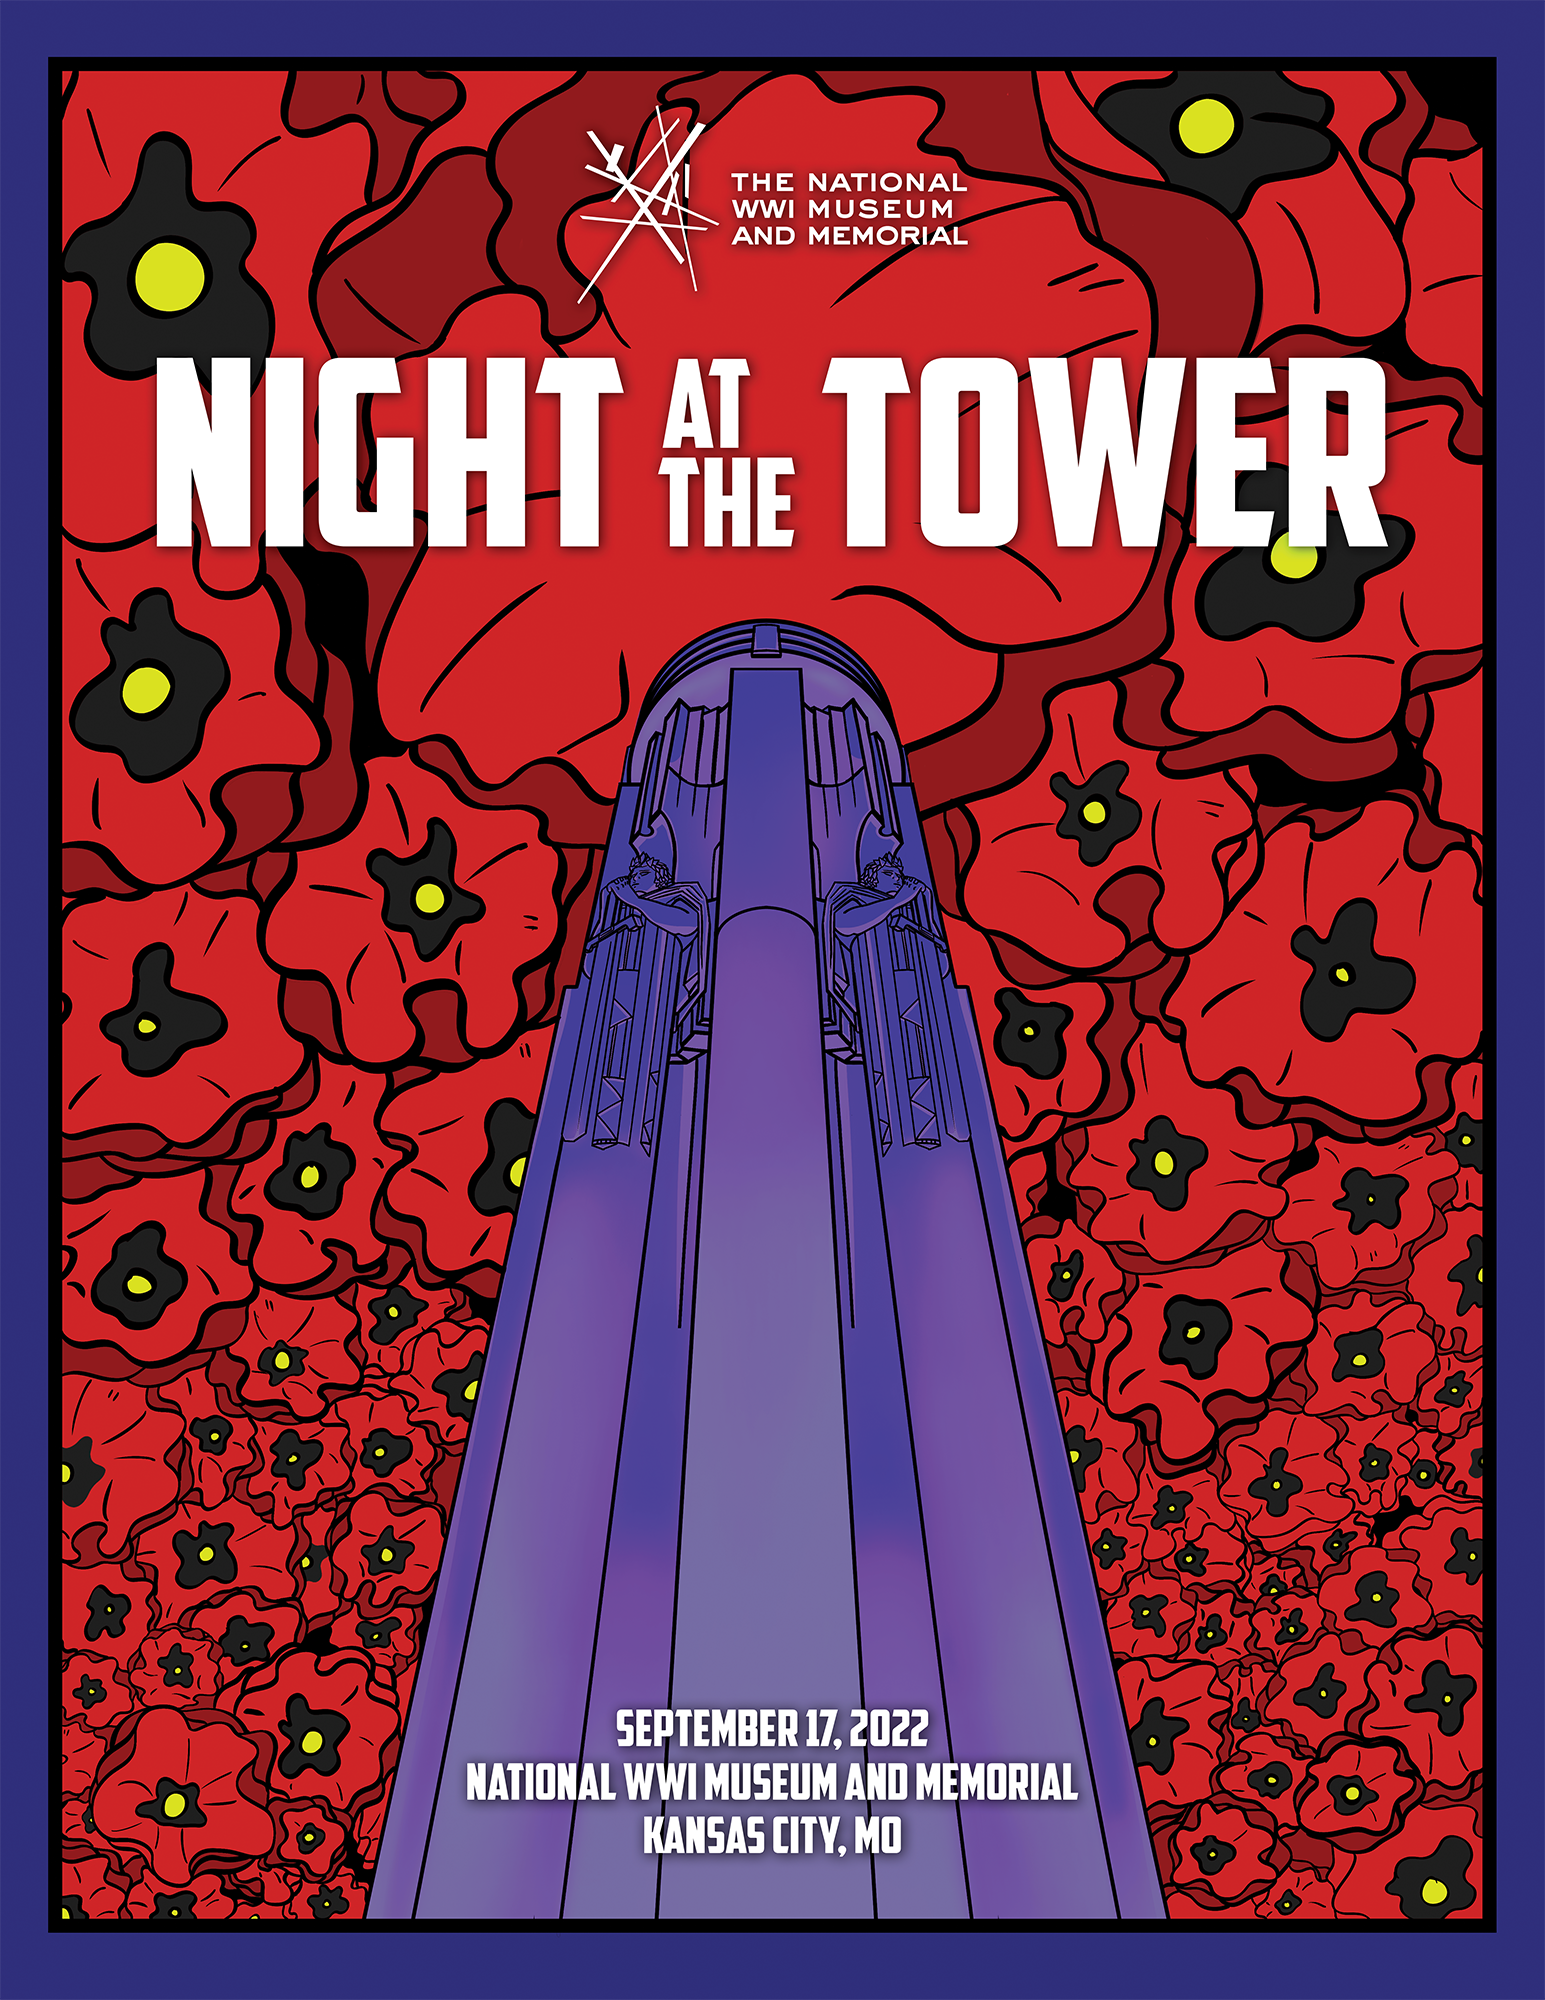 Image: Graphical depiction of the Liberty Memorial Tower, colored purple, stretching into a sky made of poppies. Text: Night at the Tower